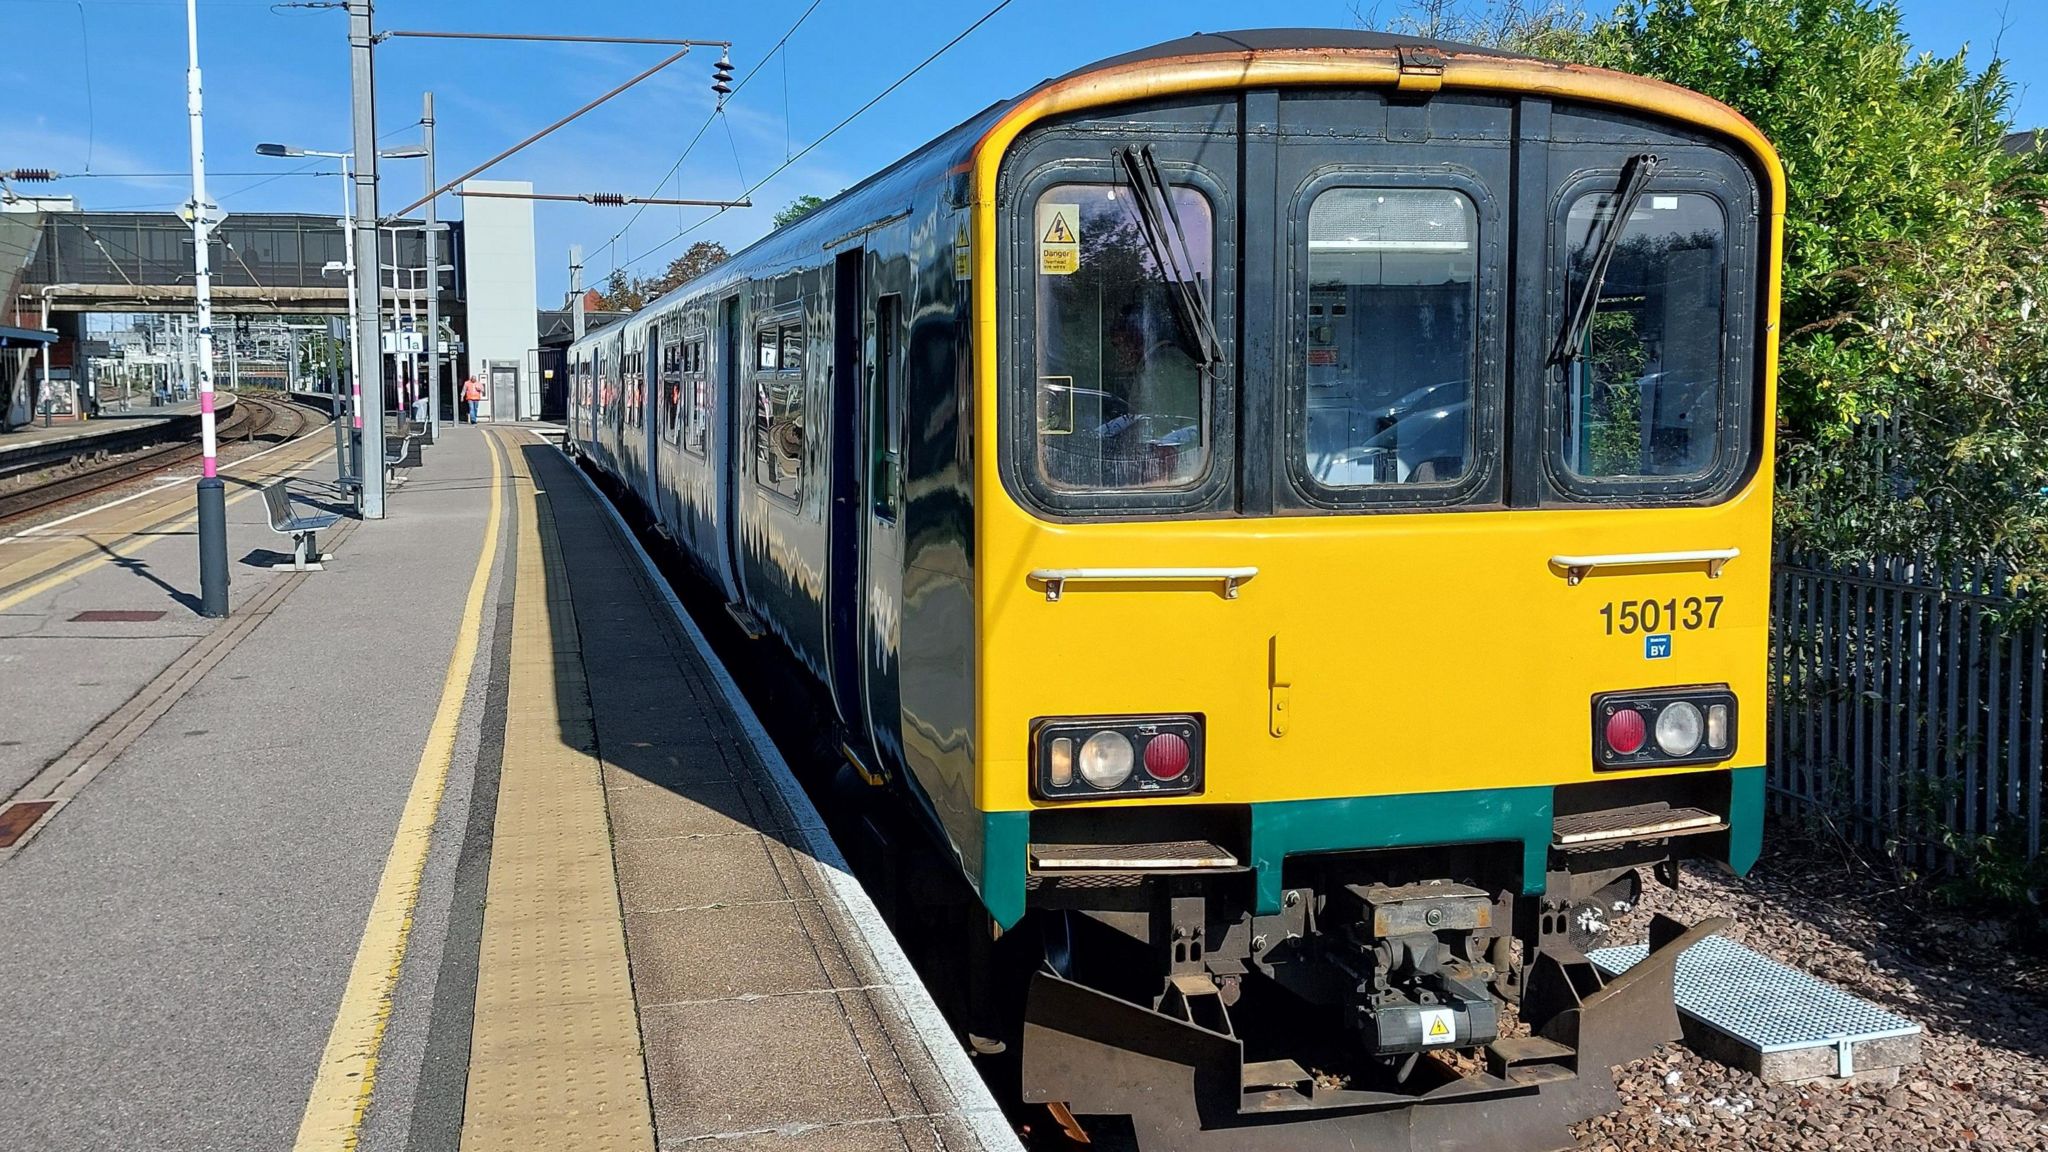 Unit 150137 pictured at Bedford station on a test run